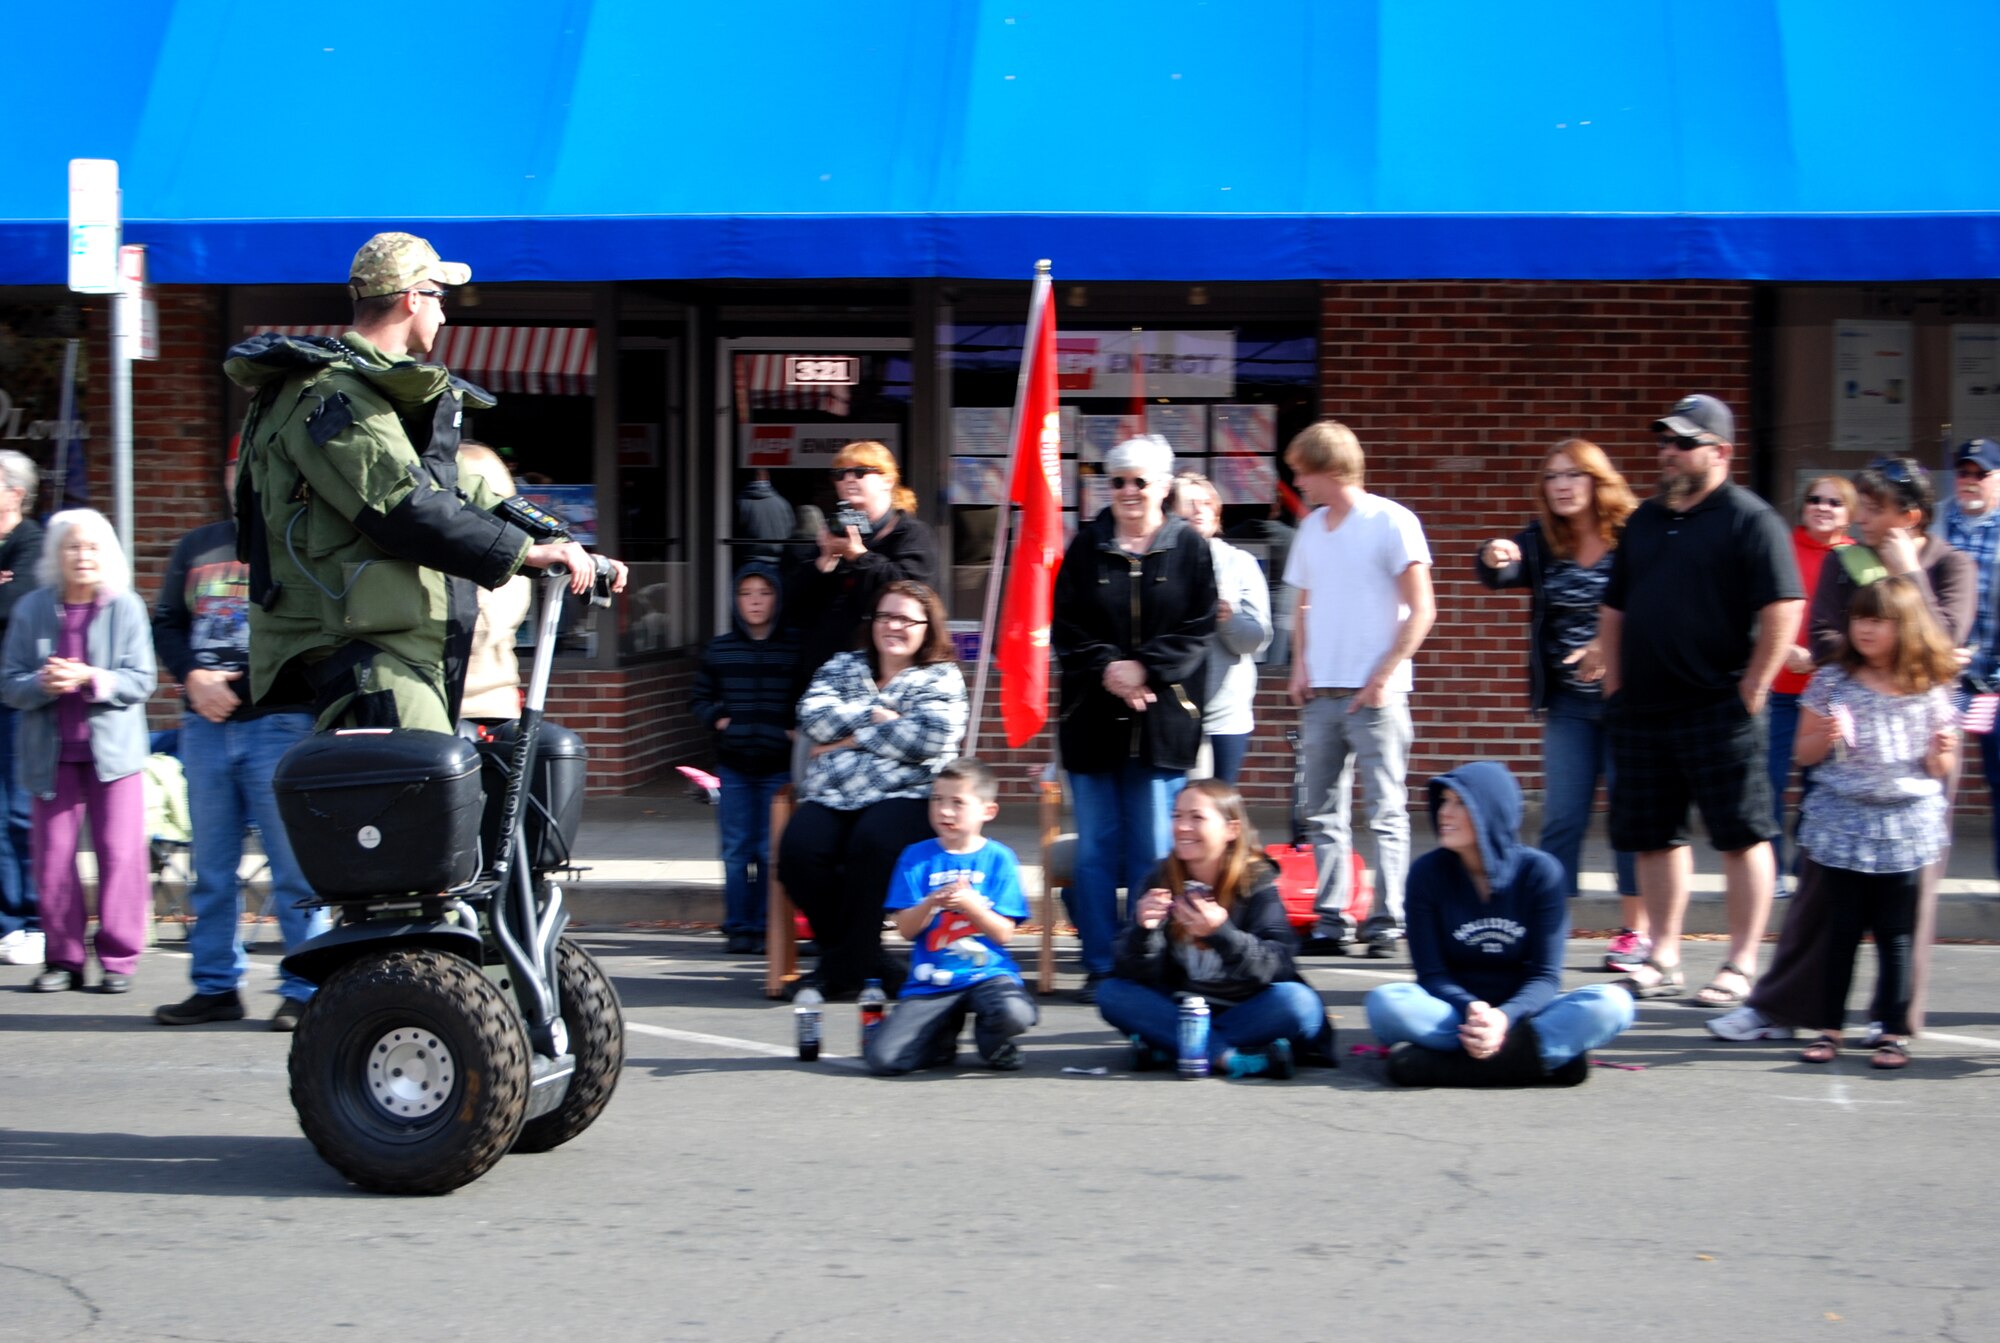 A member of the 9th Civil Engineer Squadron Explosive Ordinance Disposal Flight rides a Segway along the parade route during the Yuba-Sutter Veterans Day Parade in Marysville, Calif., Nov. 11, 2012. More than 400 Team Beale Airmen participated in the parade. (U.S. Air Force photo by Capt. Brian Wagner/Released)